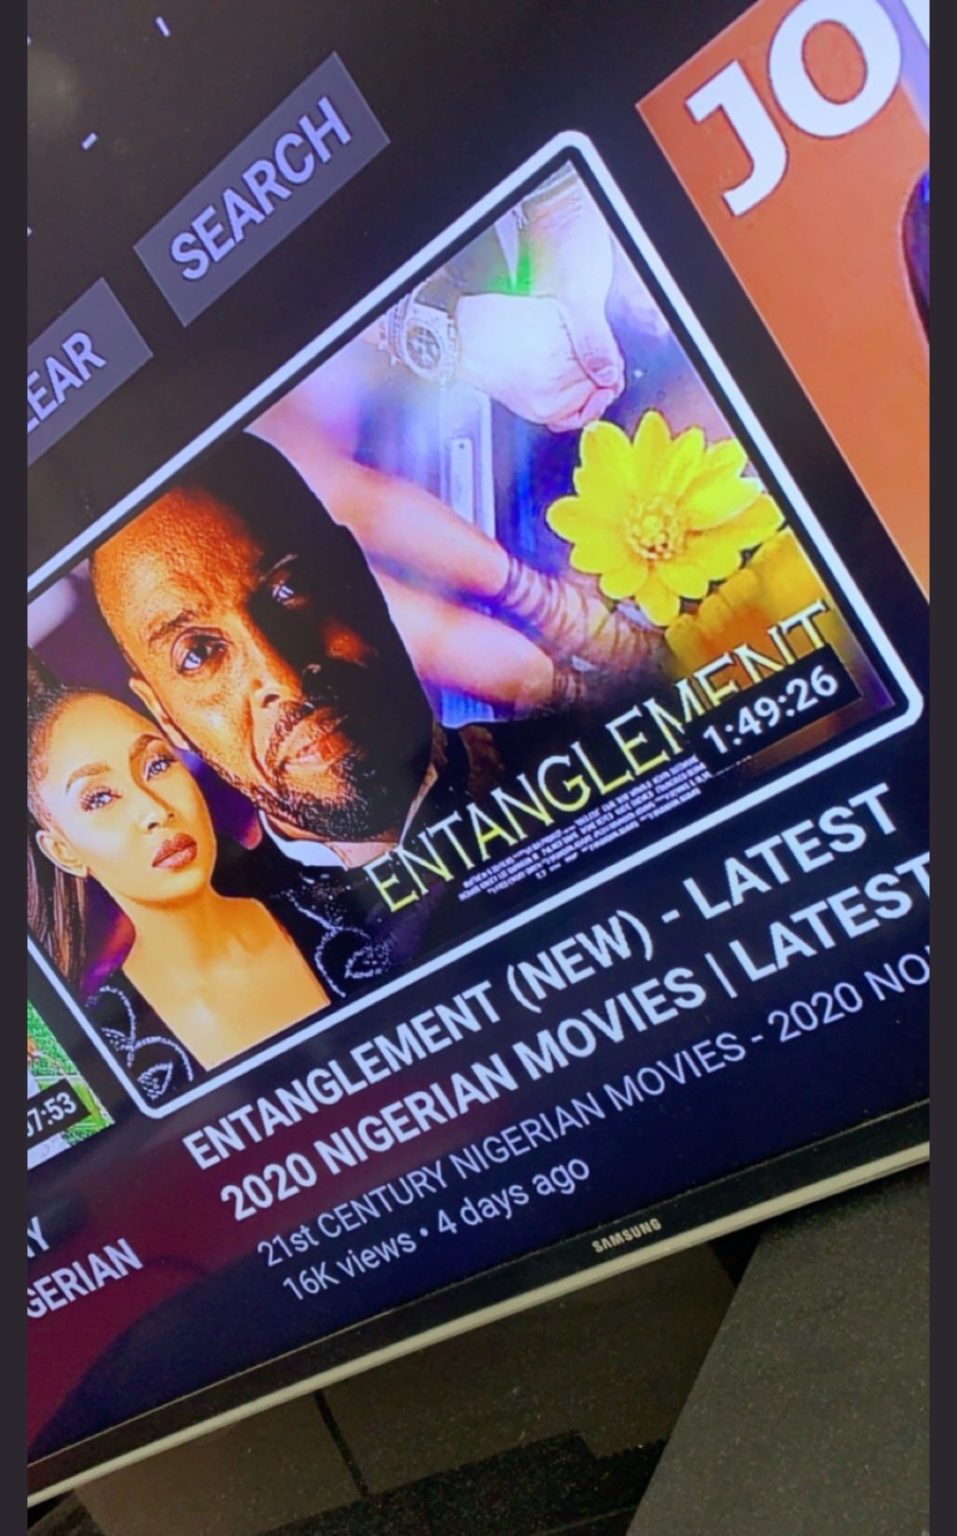 Barely Two Weeks After Will Smith And Wife’s Saga, Nollywood Releases New Movie Titled ‘Entanglement’